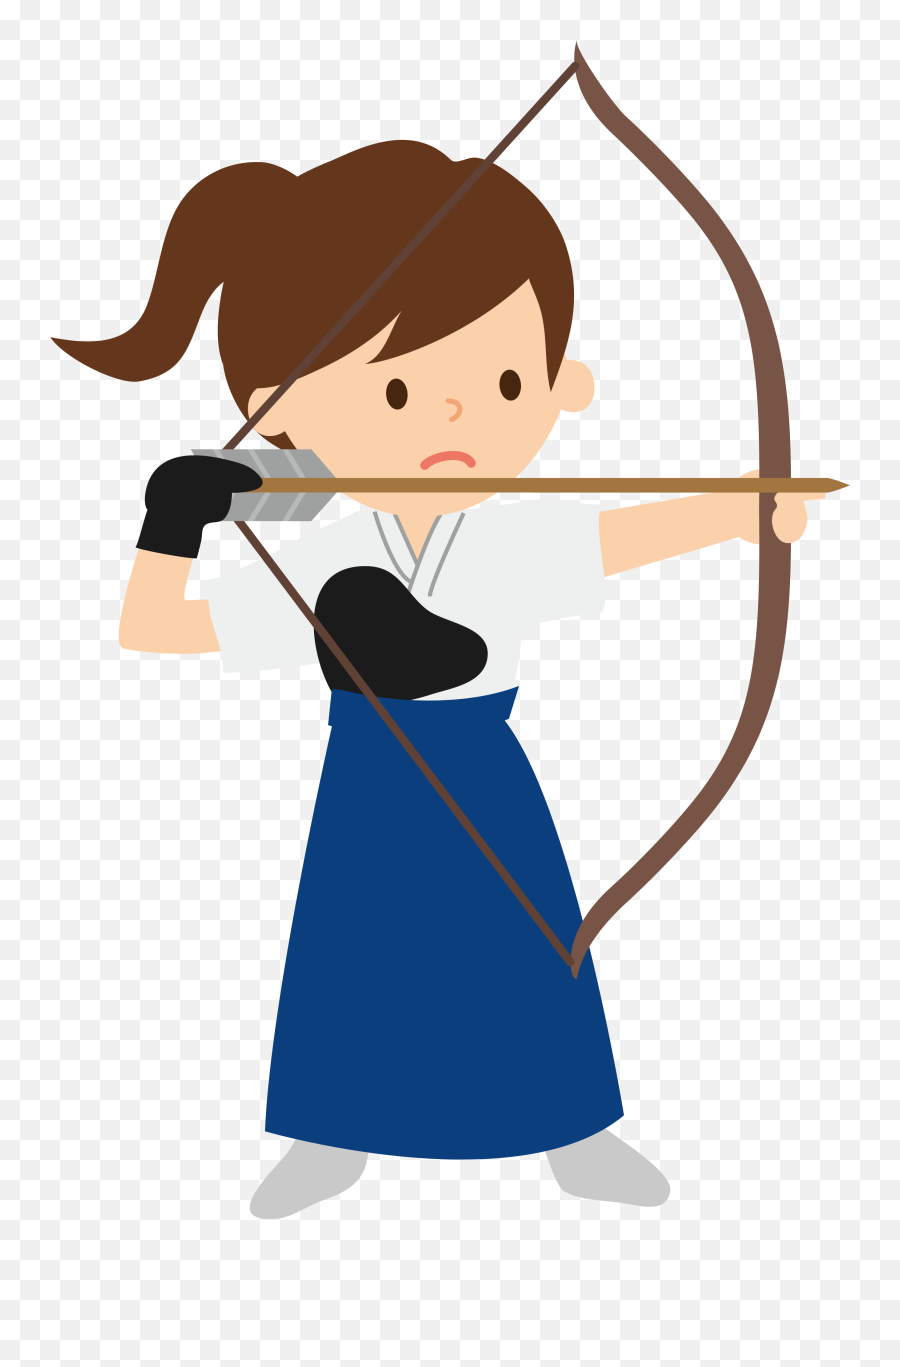 Skyrim Dwarven Crossbow - Kyudo Clipart Png Download Archer Clipart,Crossbow Png